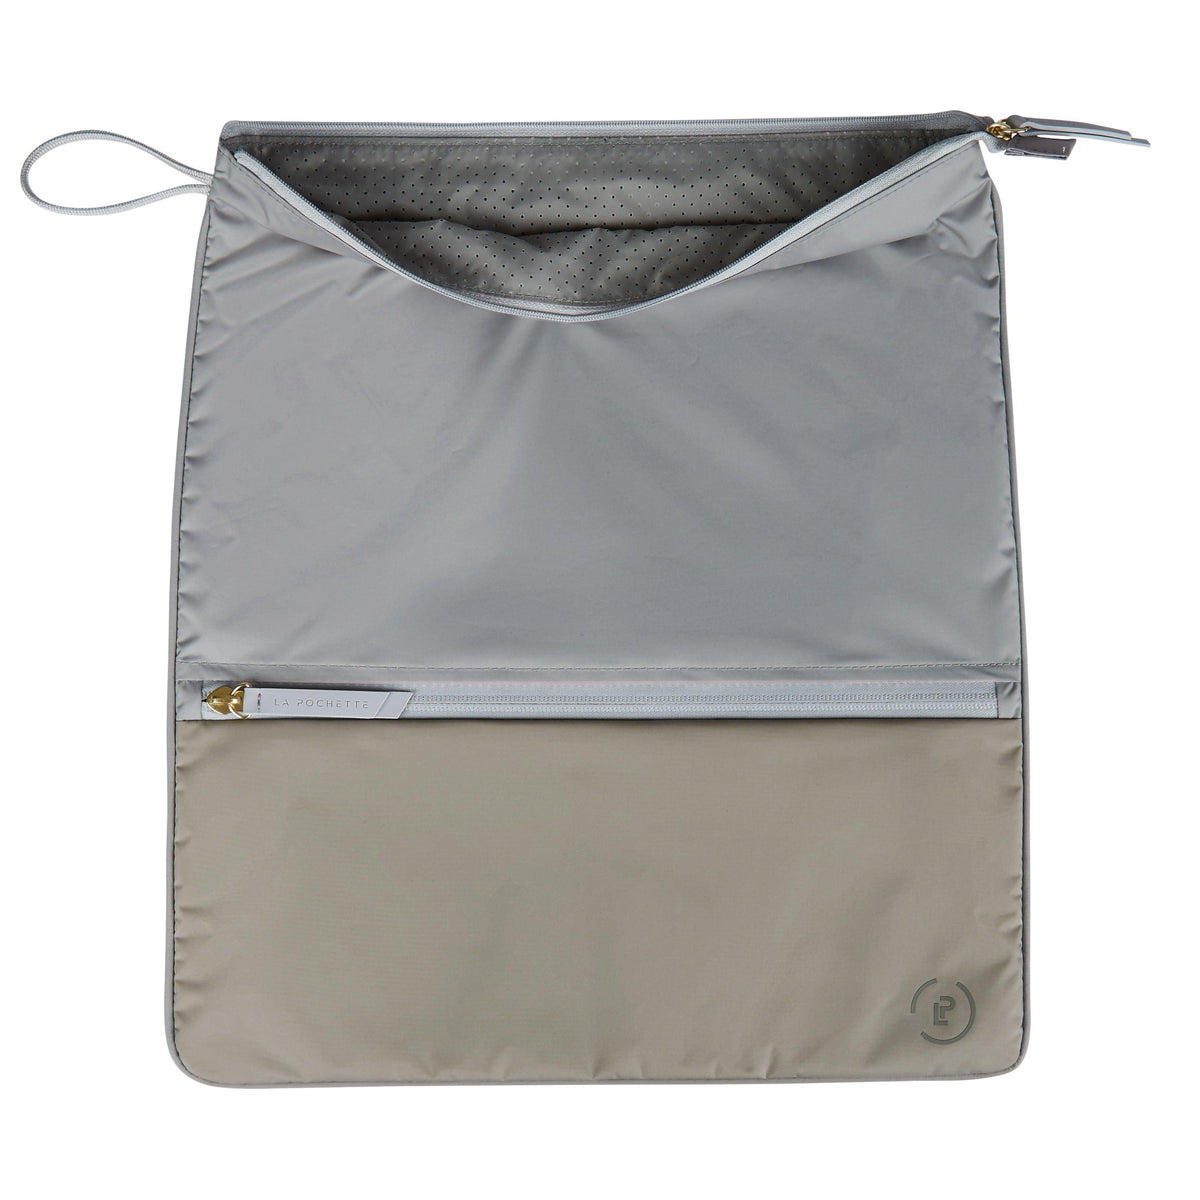 Shadow Walnut Sweat Bag lying flat, showing unzipped top to reveal inner perforated grey lining